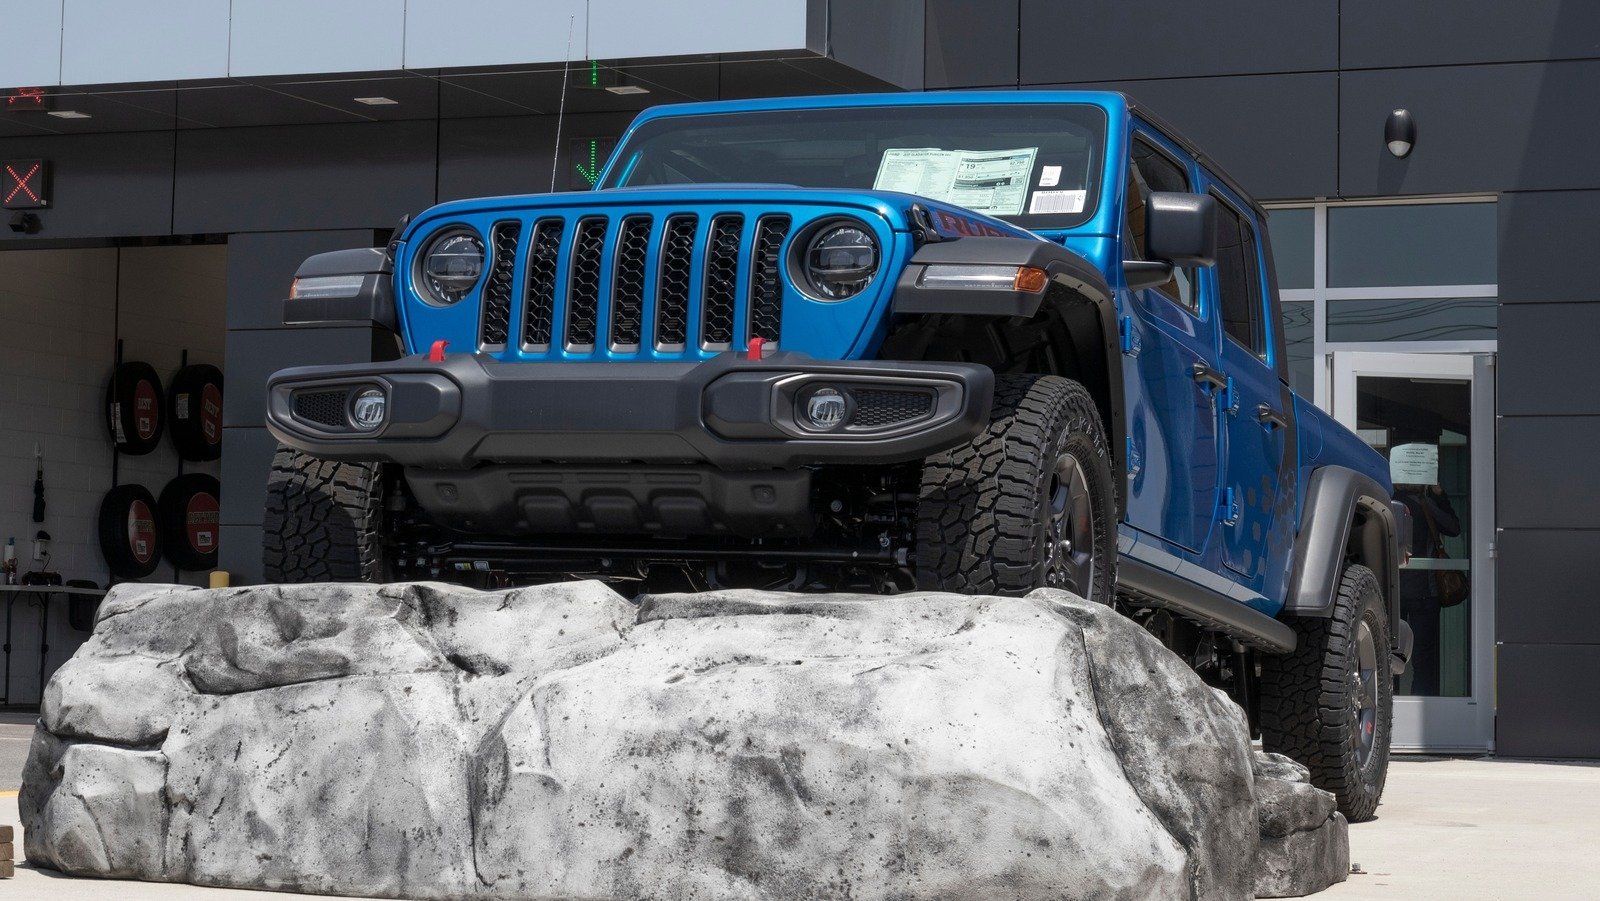 The Wrangler Clone Jeep Wants To Ban